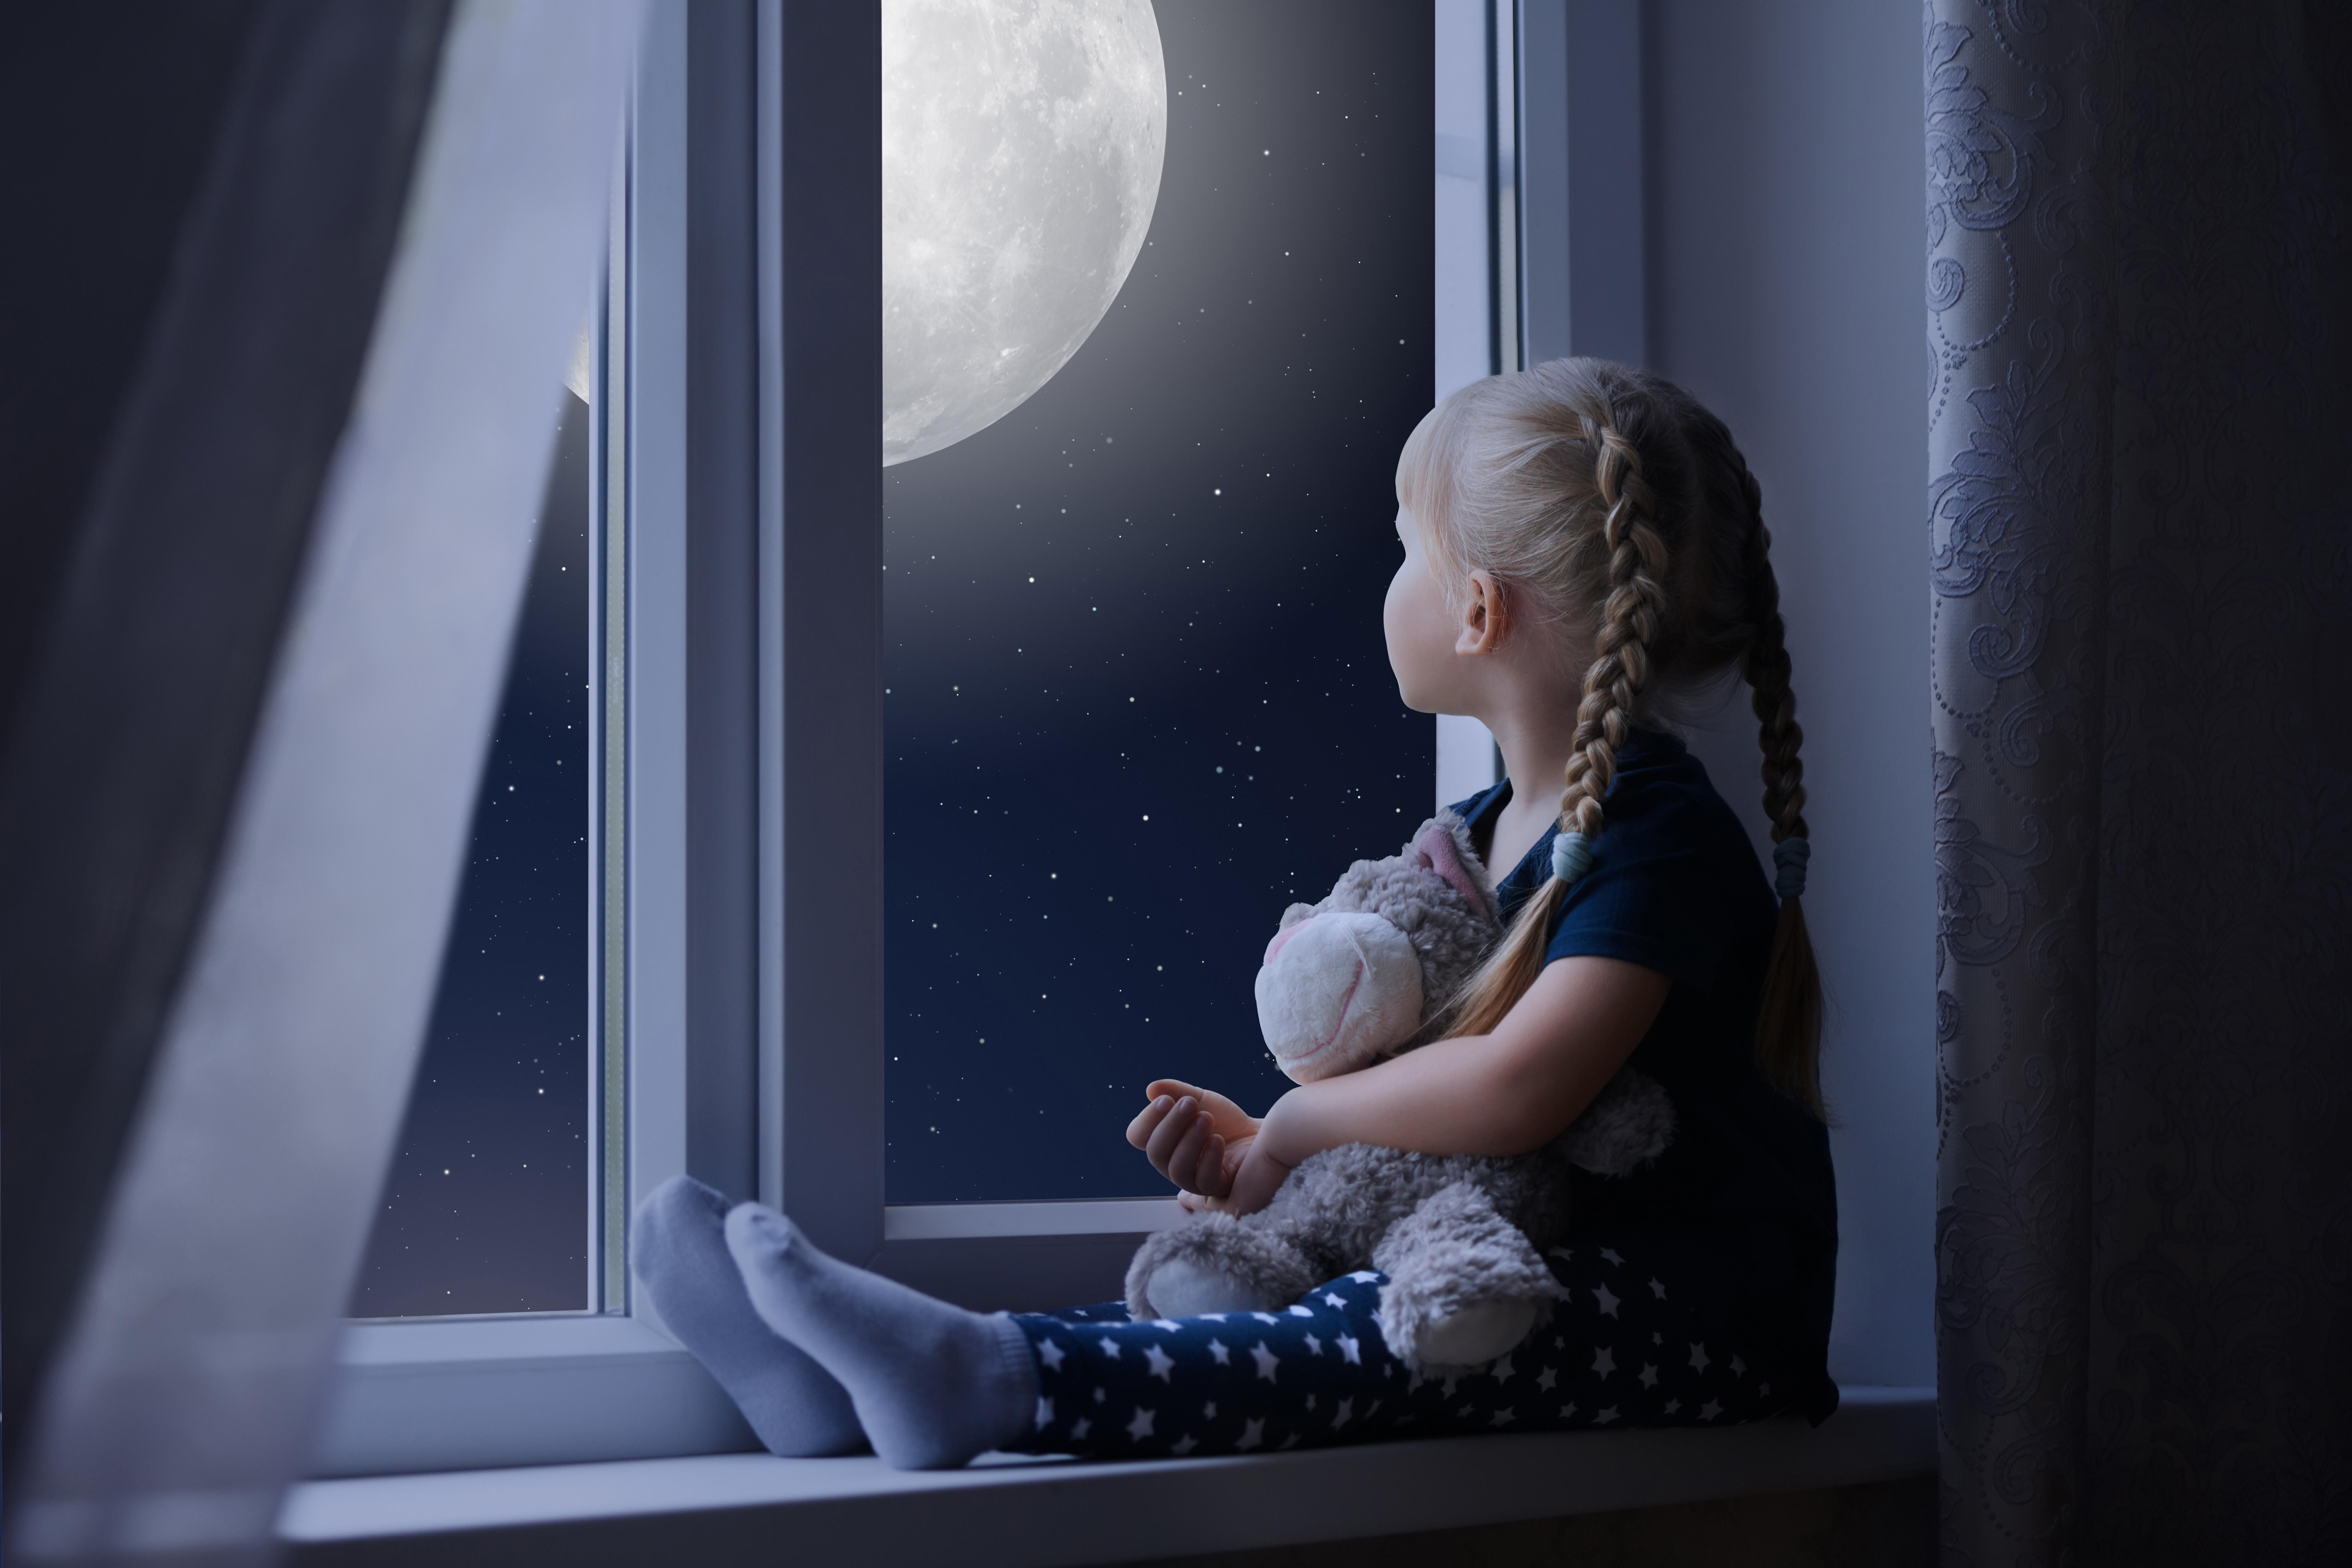 Girl And Moon Wallpapers - Wallpaper Cave